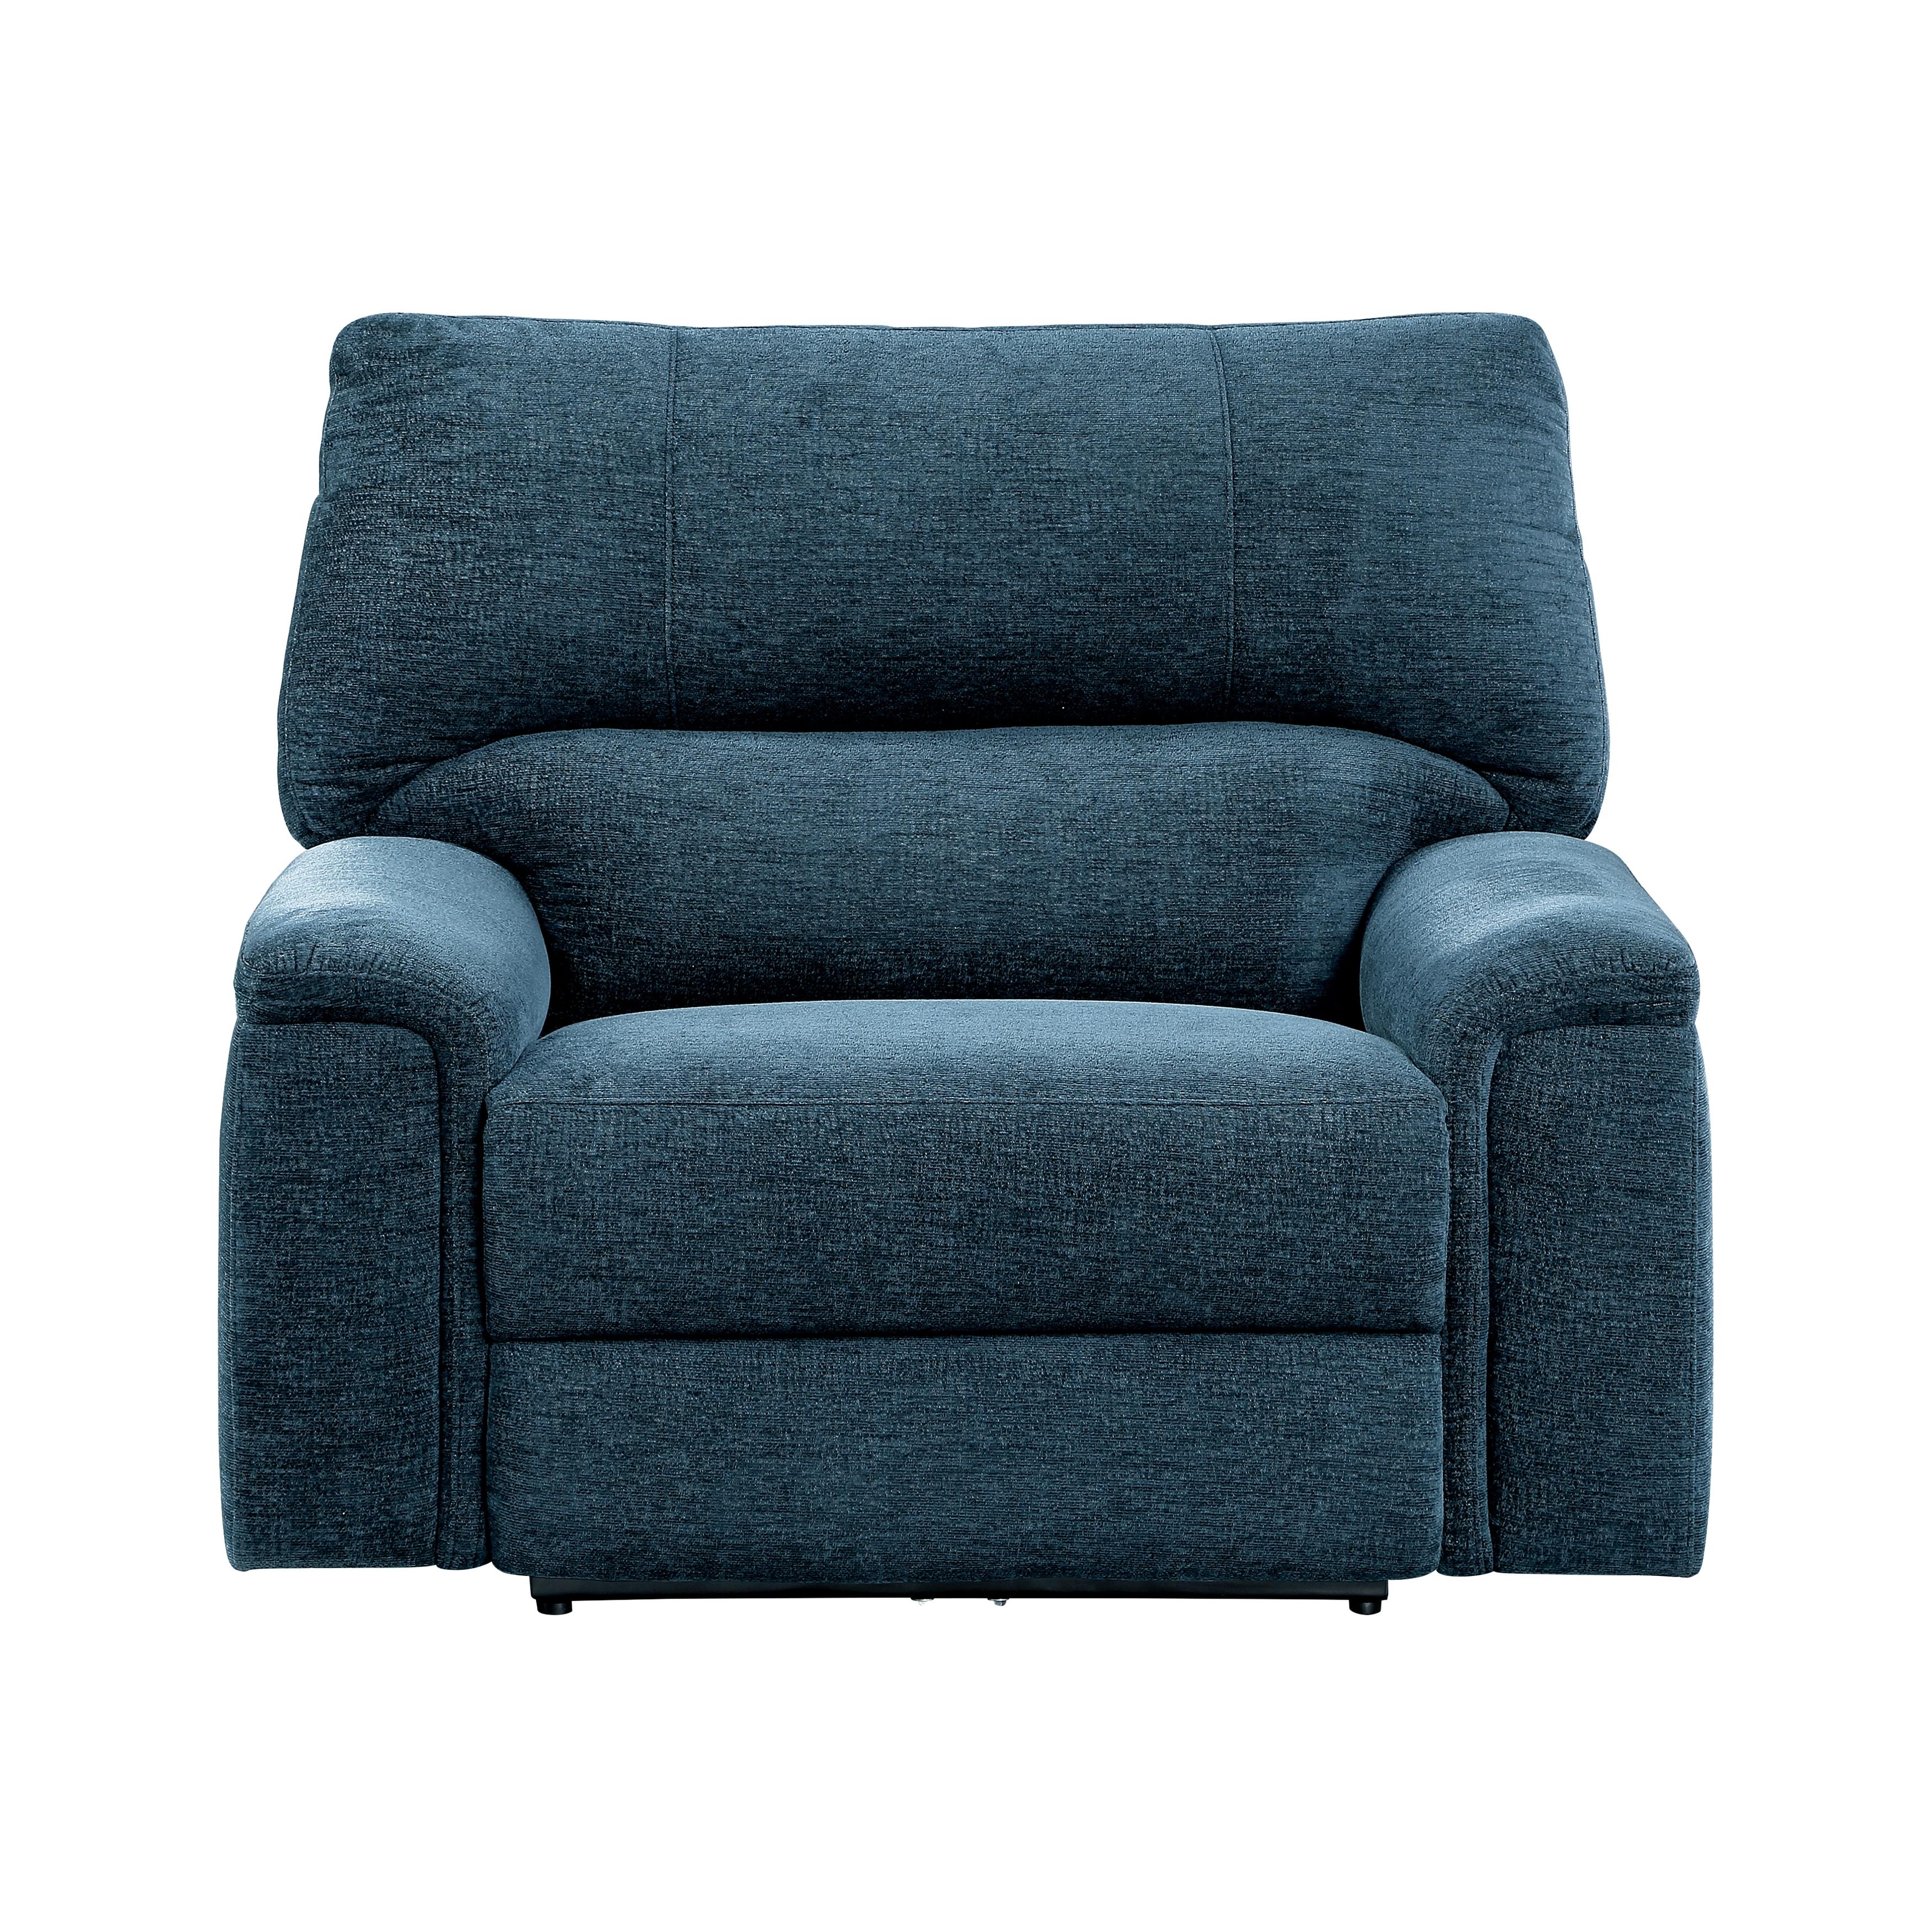 Transitional Reclining Chair 9413IN-1 Dickinson 9413IN-1 in Indigo Chenille